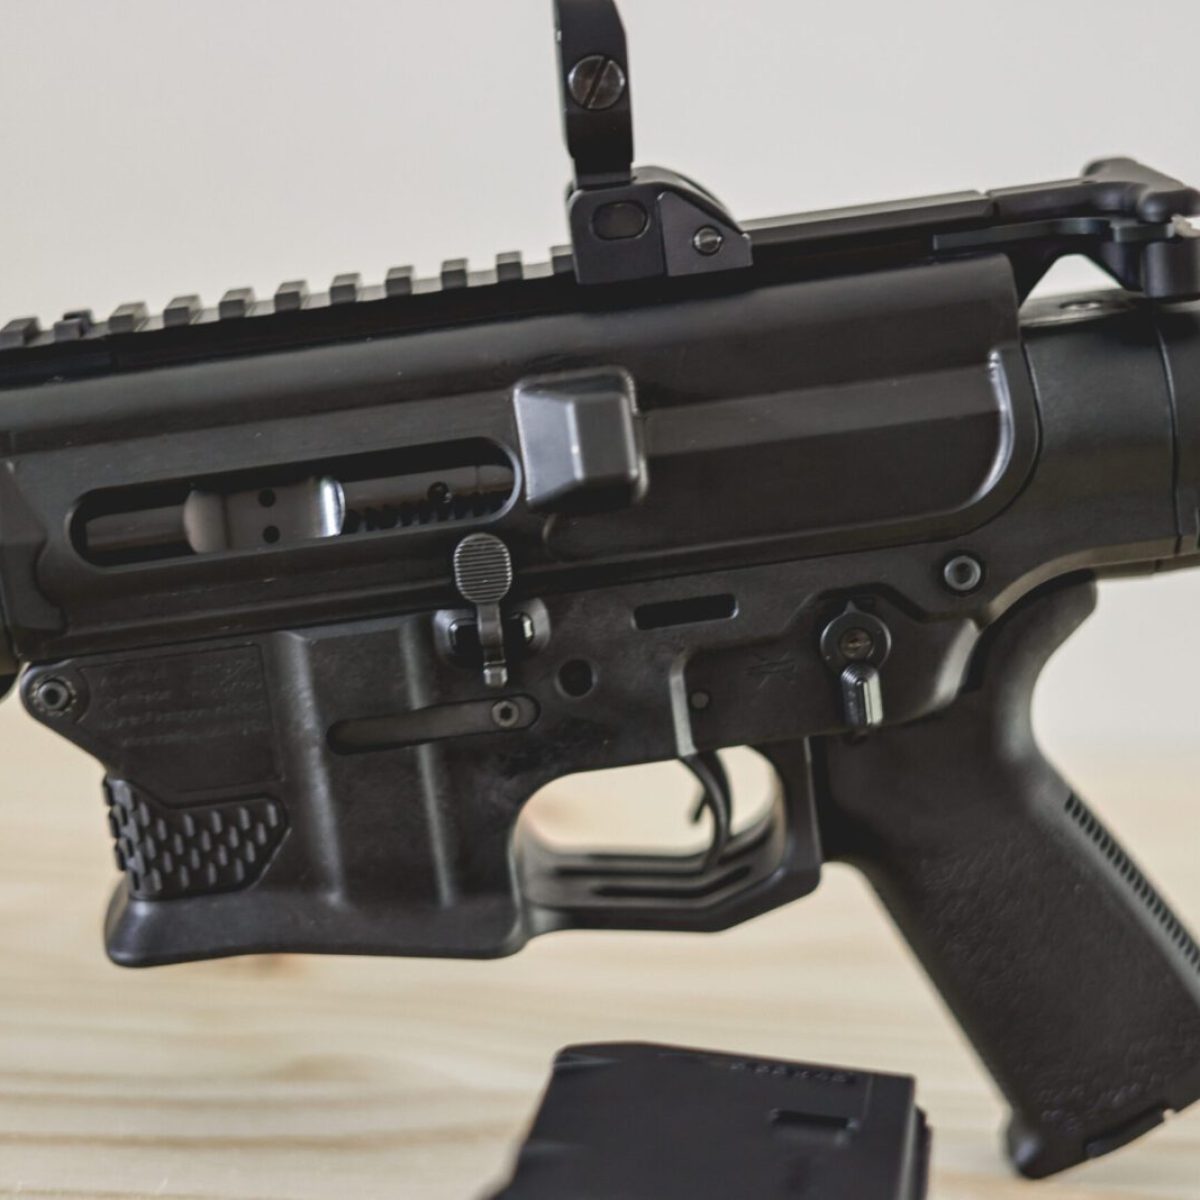 double barrel AR15 rifle focus on the pistol grip, trigger, safety, mag well, extraction point and picatinny rails.